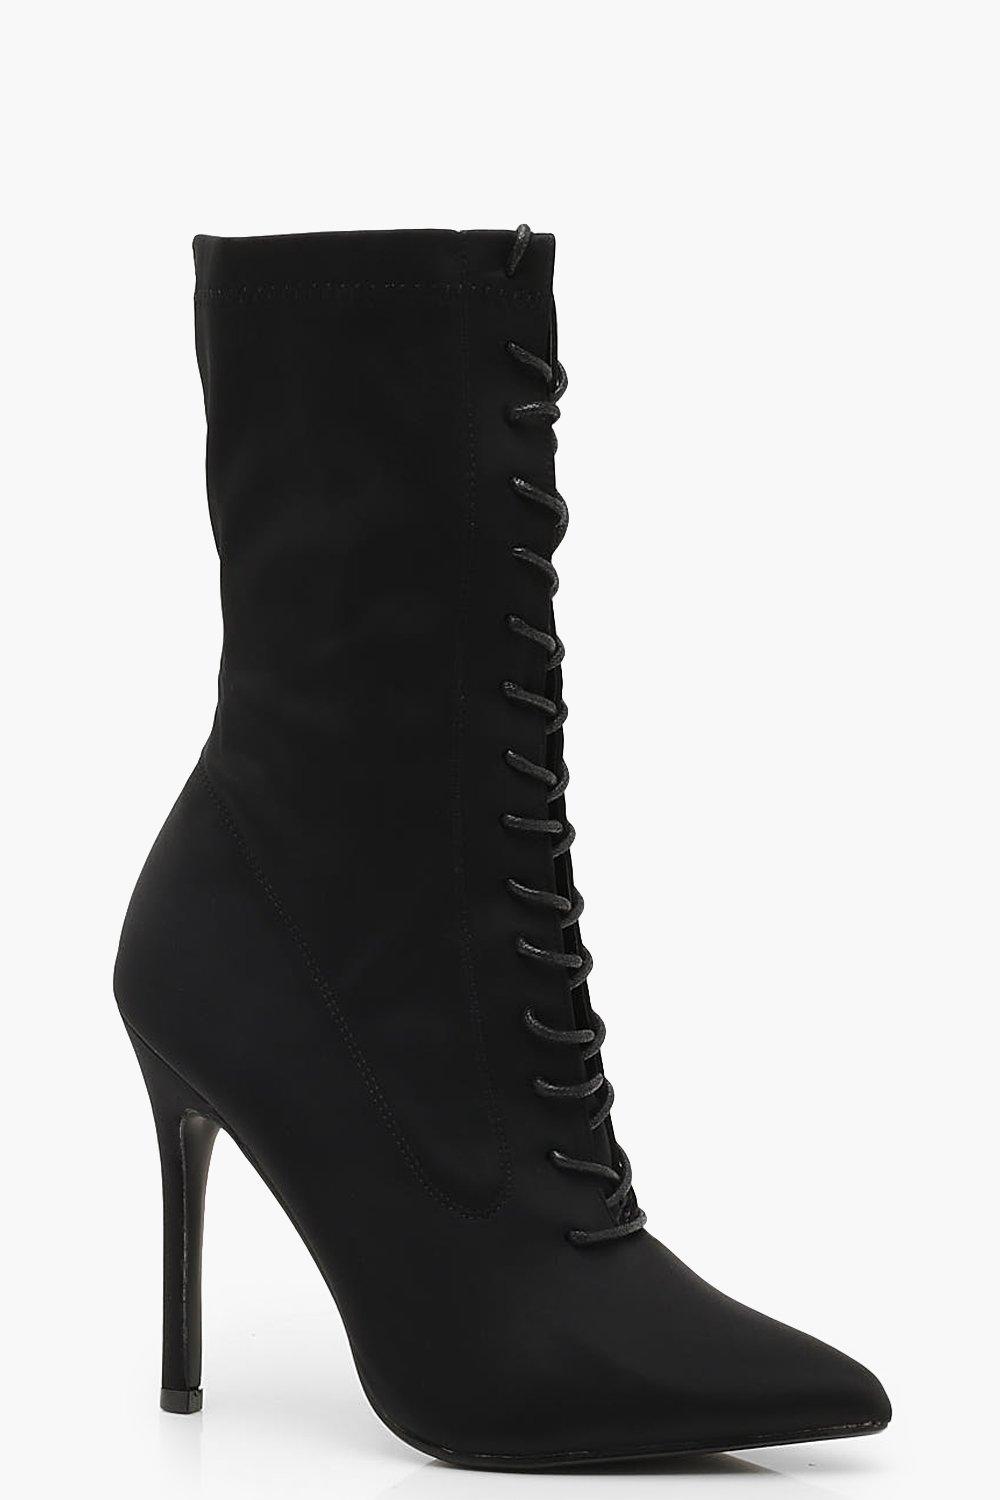 lace up heeled shoe boots